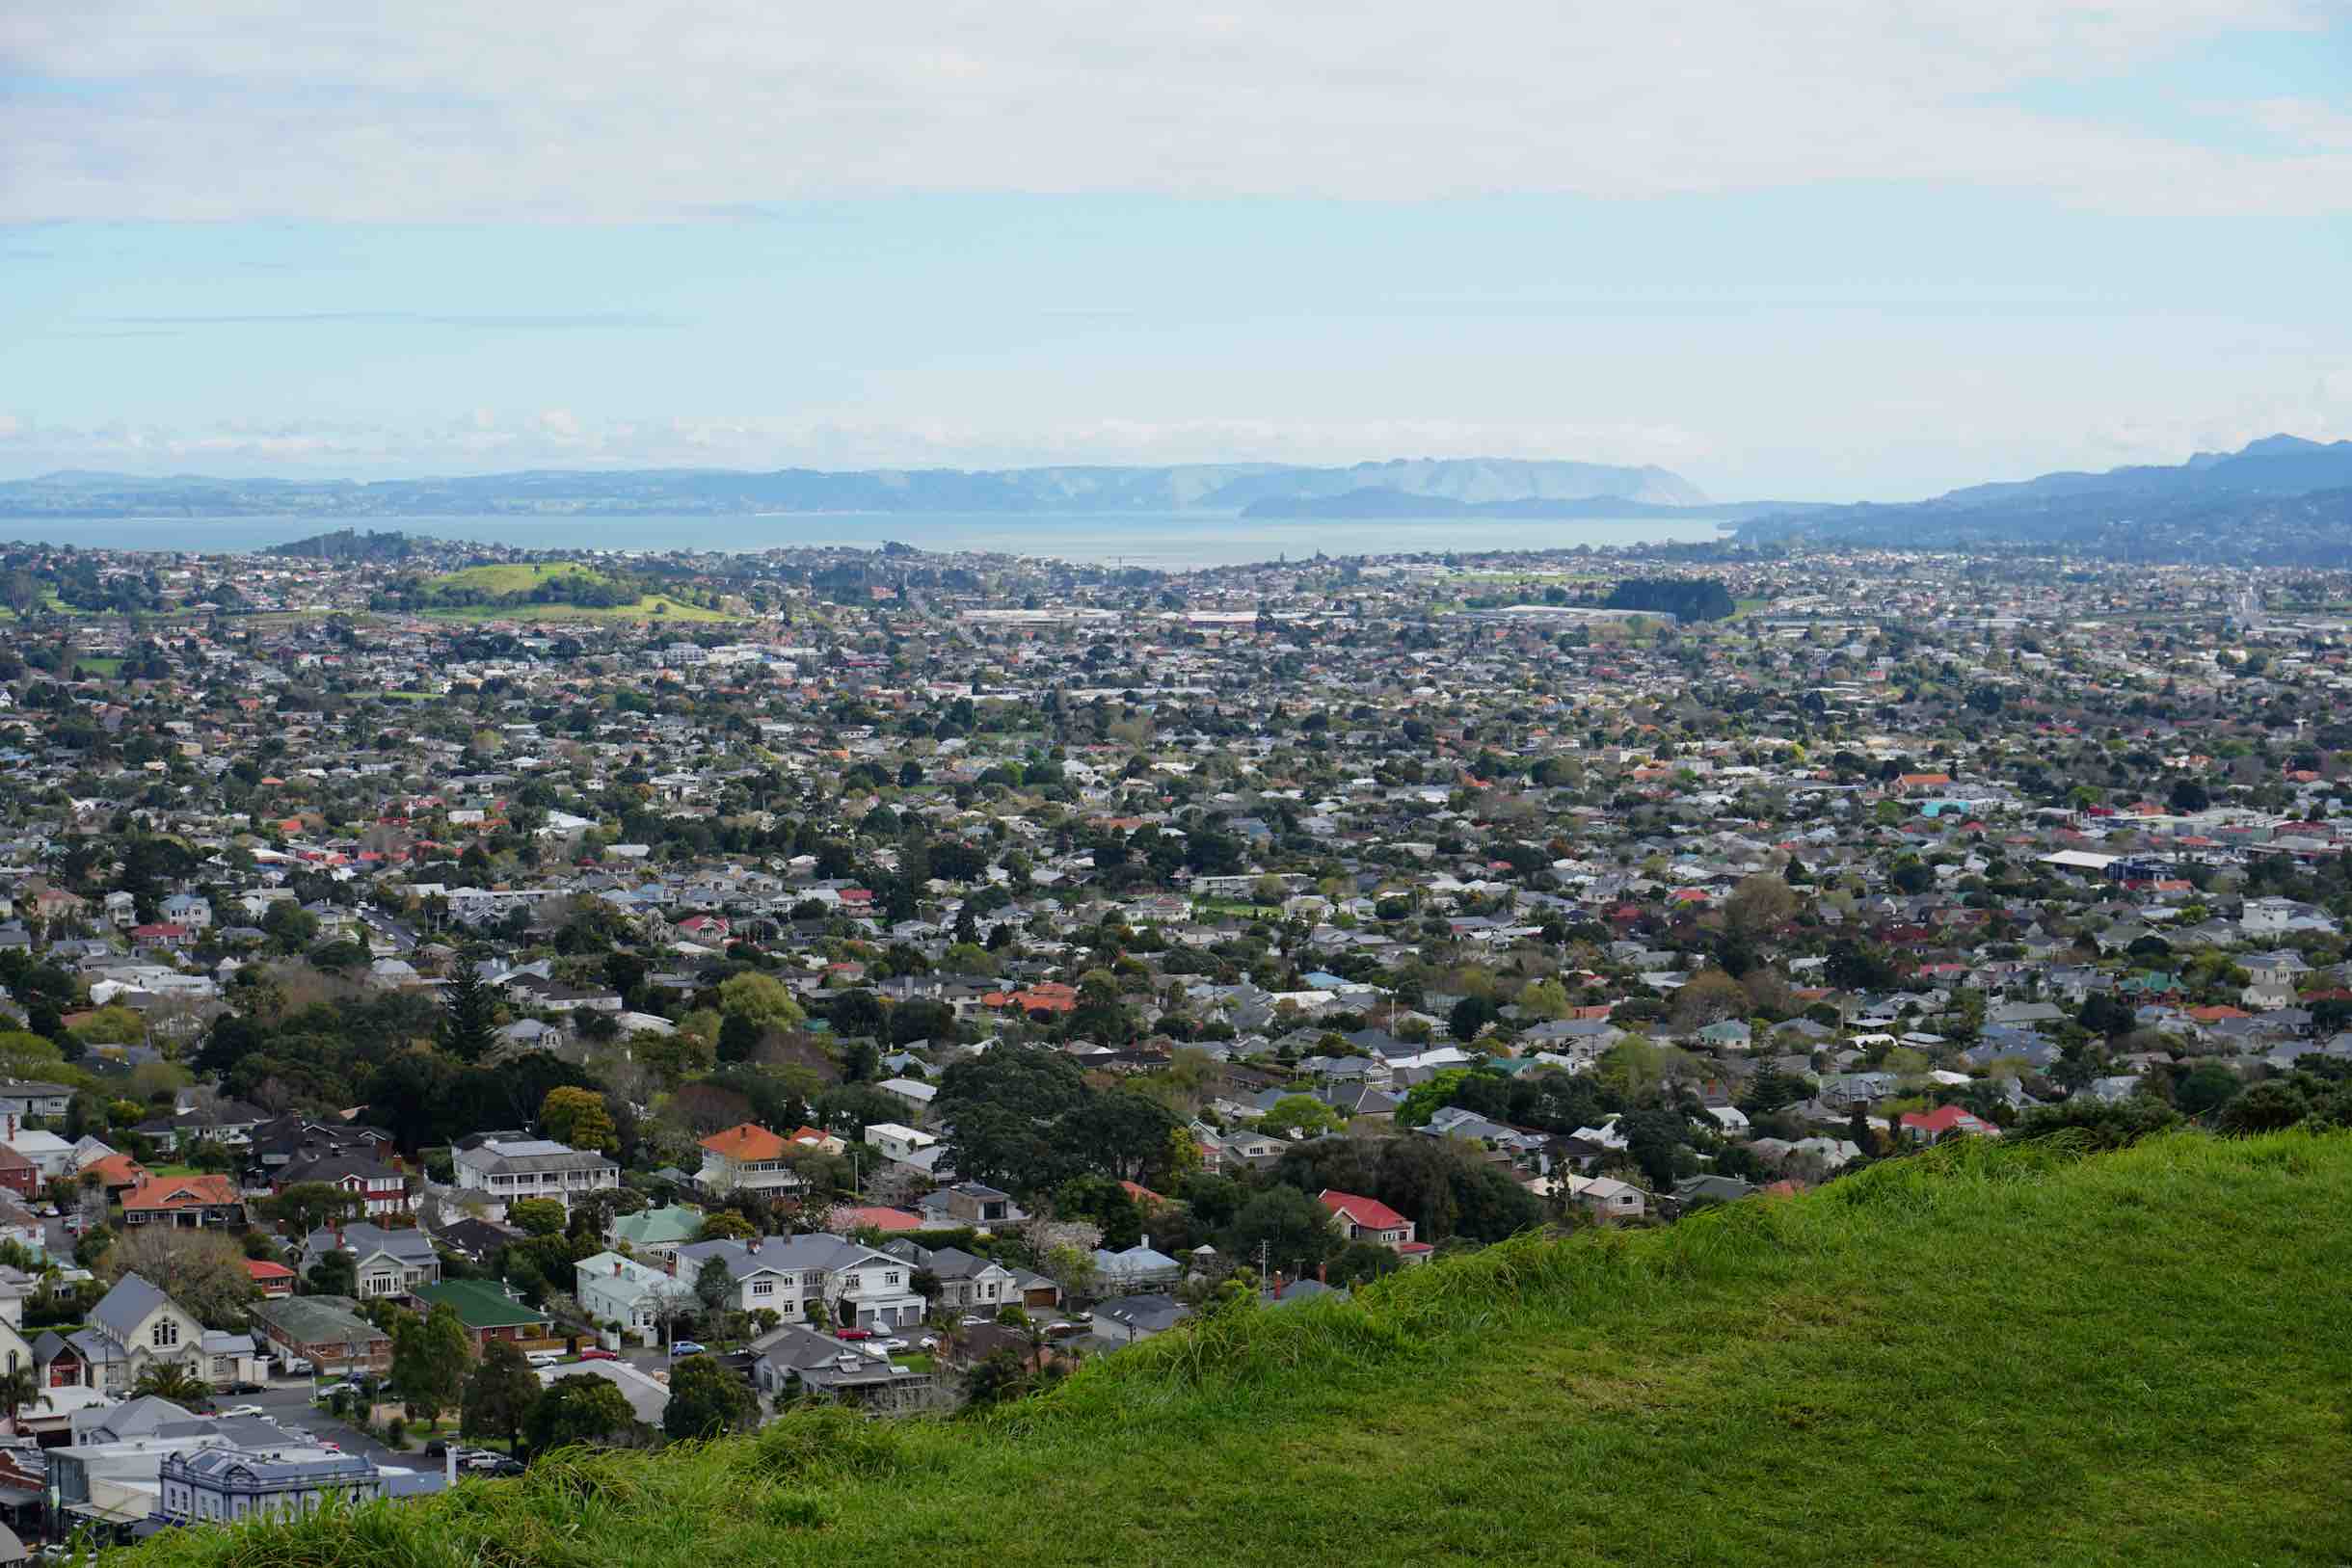 The suburbs of Auckland from Mount Eden. A dormant volcano now covered by grass and foliage, right in the middle of Auckland.